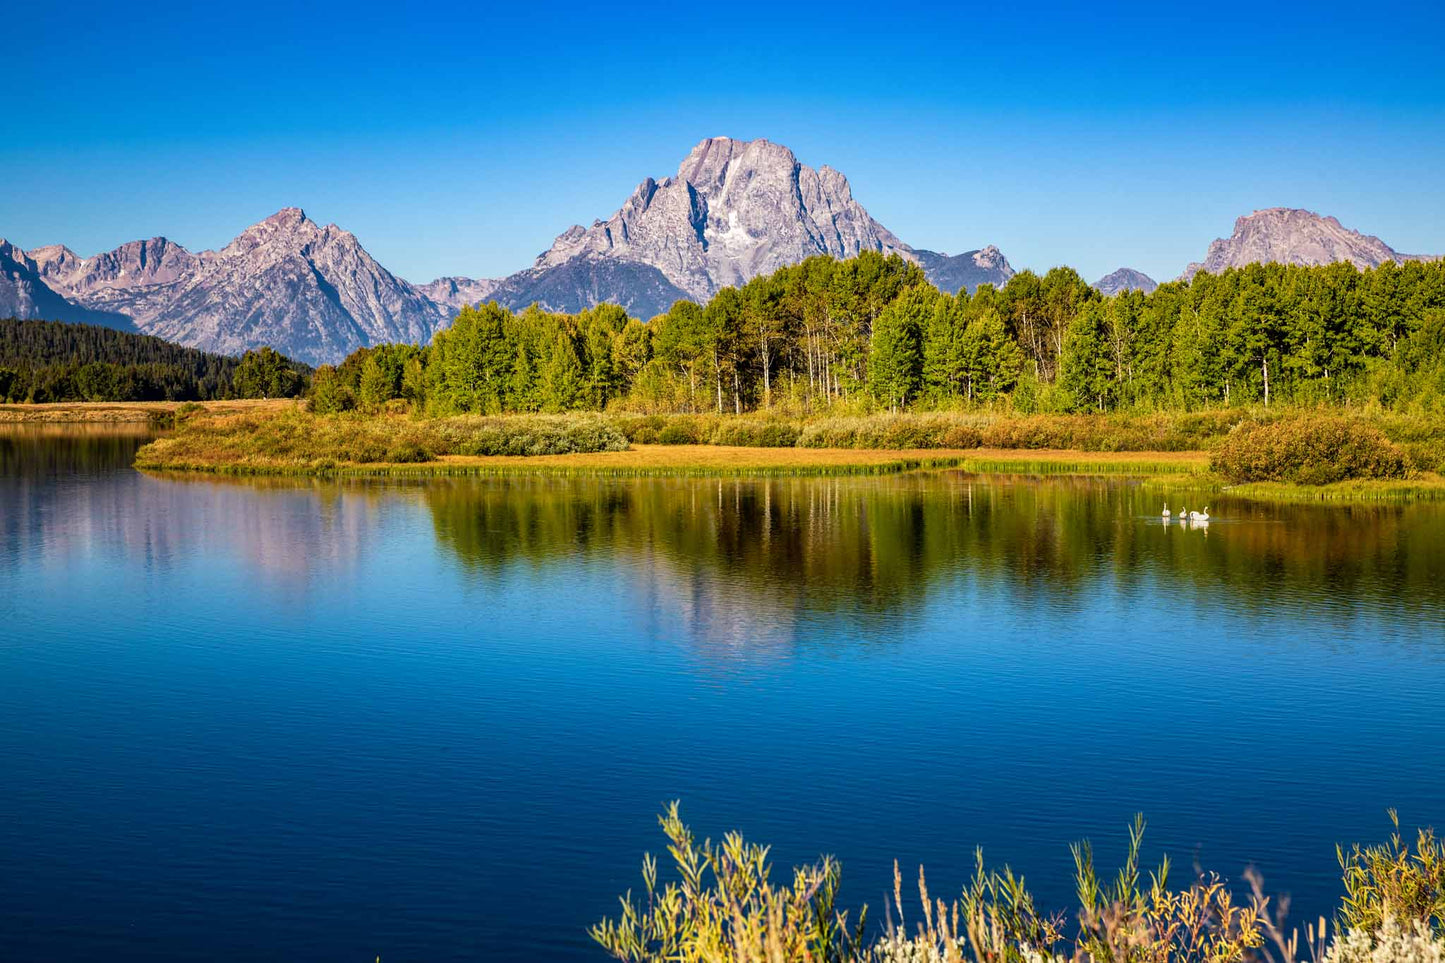 Rocky Mountain landscape photography print of Mount Moran overlooking the Snake River at Oxbow Bend on an autumn day in Grand Teton National Park, Wyoming by Sean Ramsey of Southern Plains Photography.